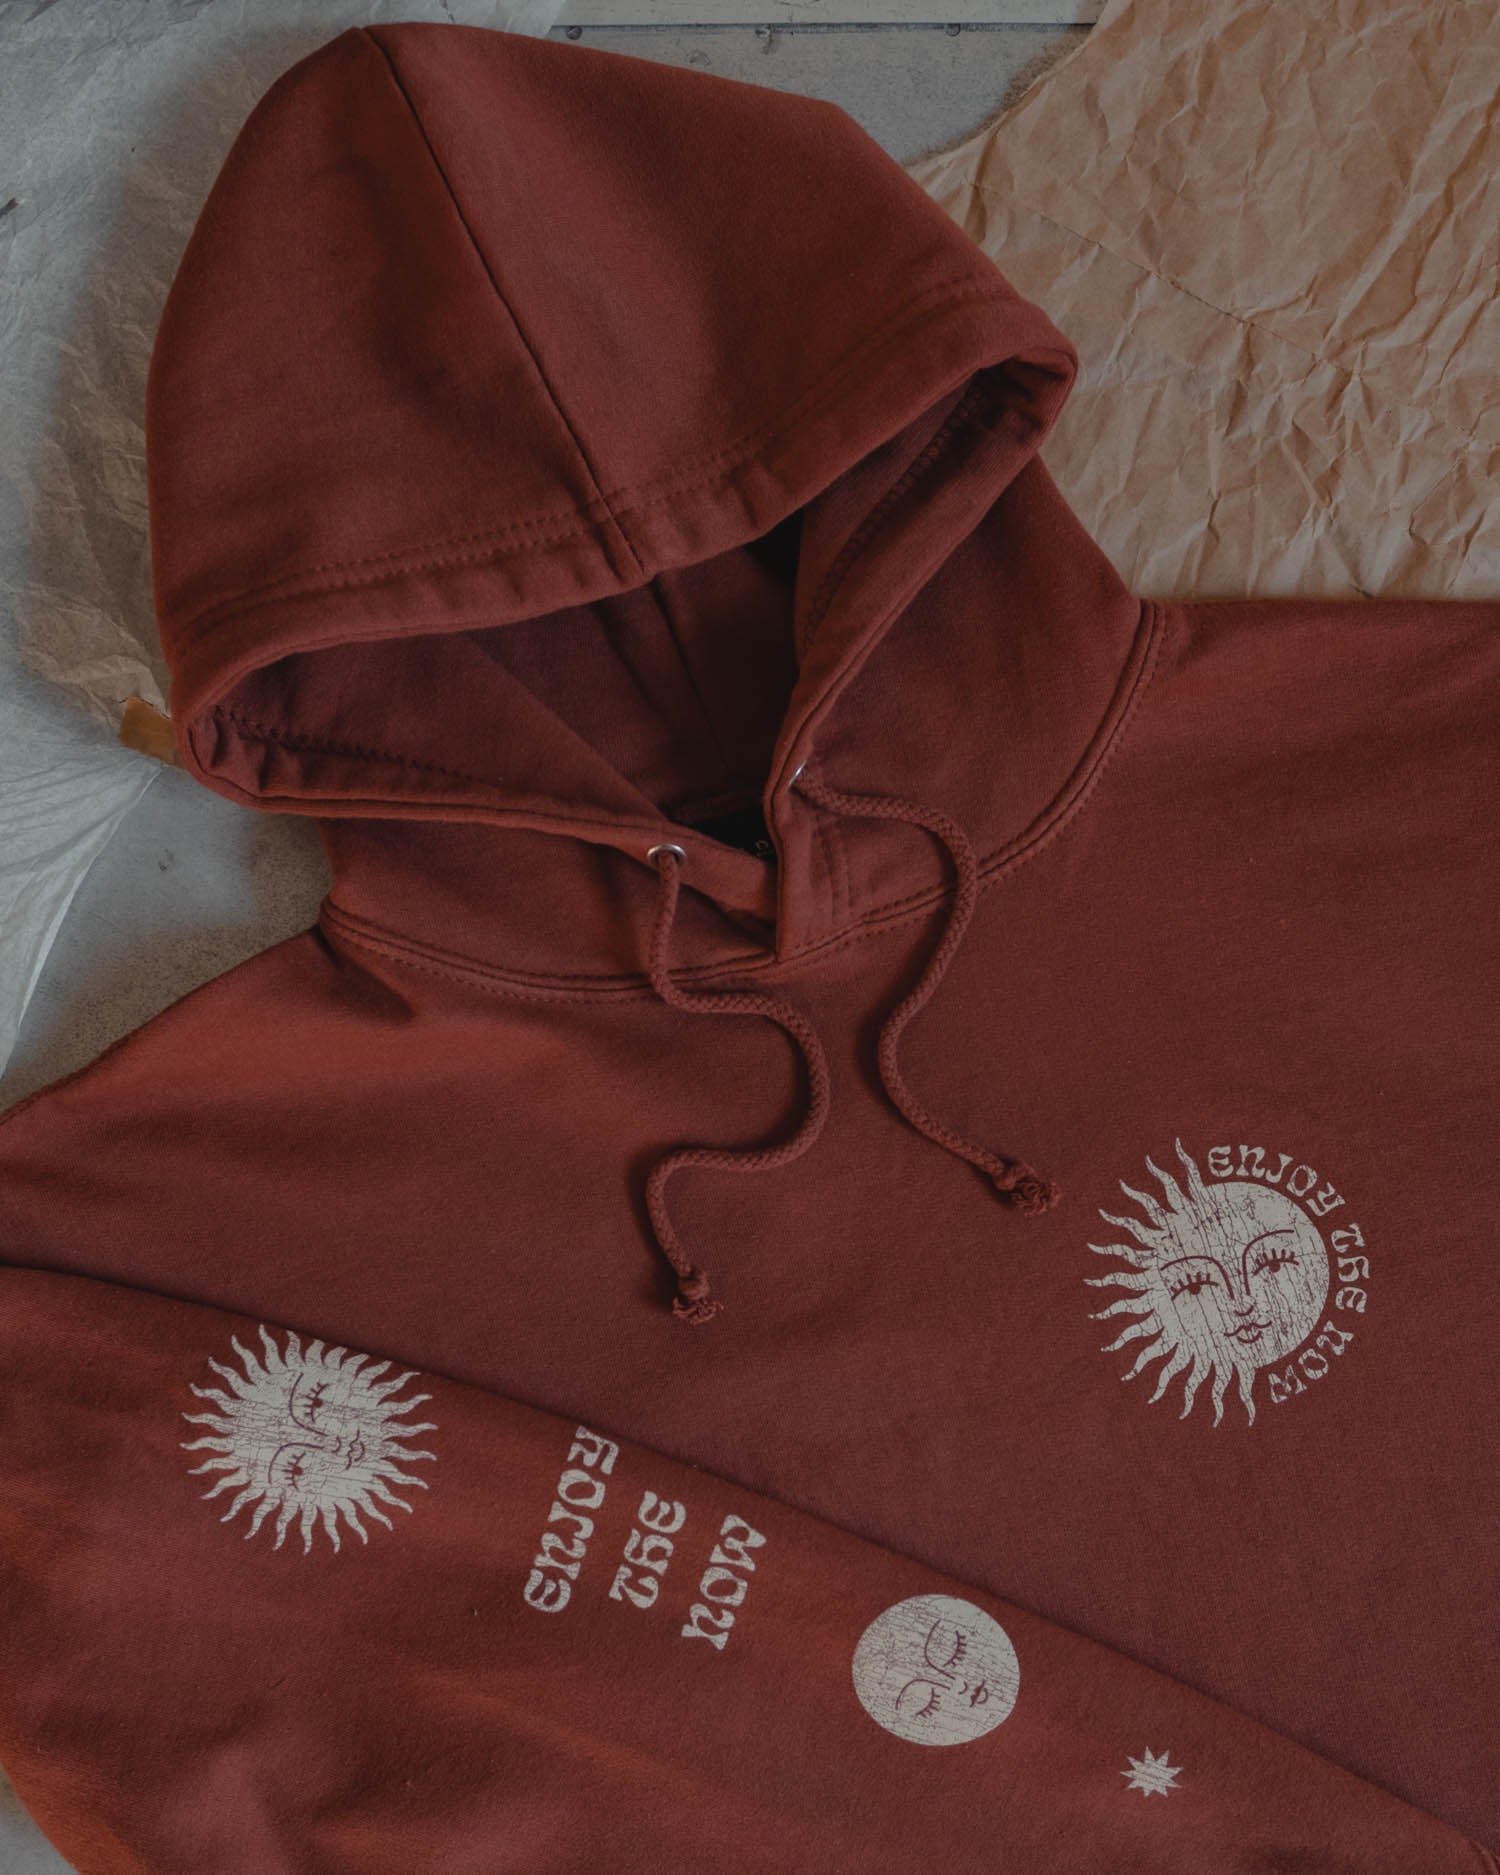 Terracotta hoody with sun and moon design by Art Disco Original Goods